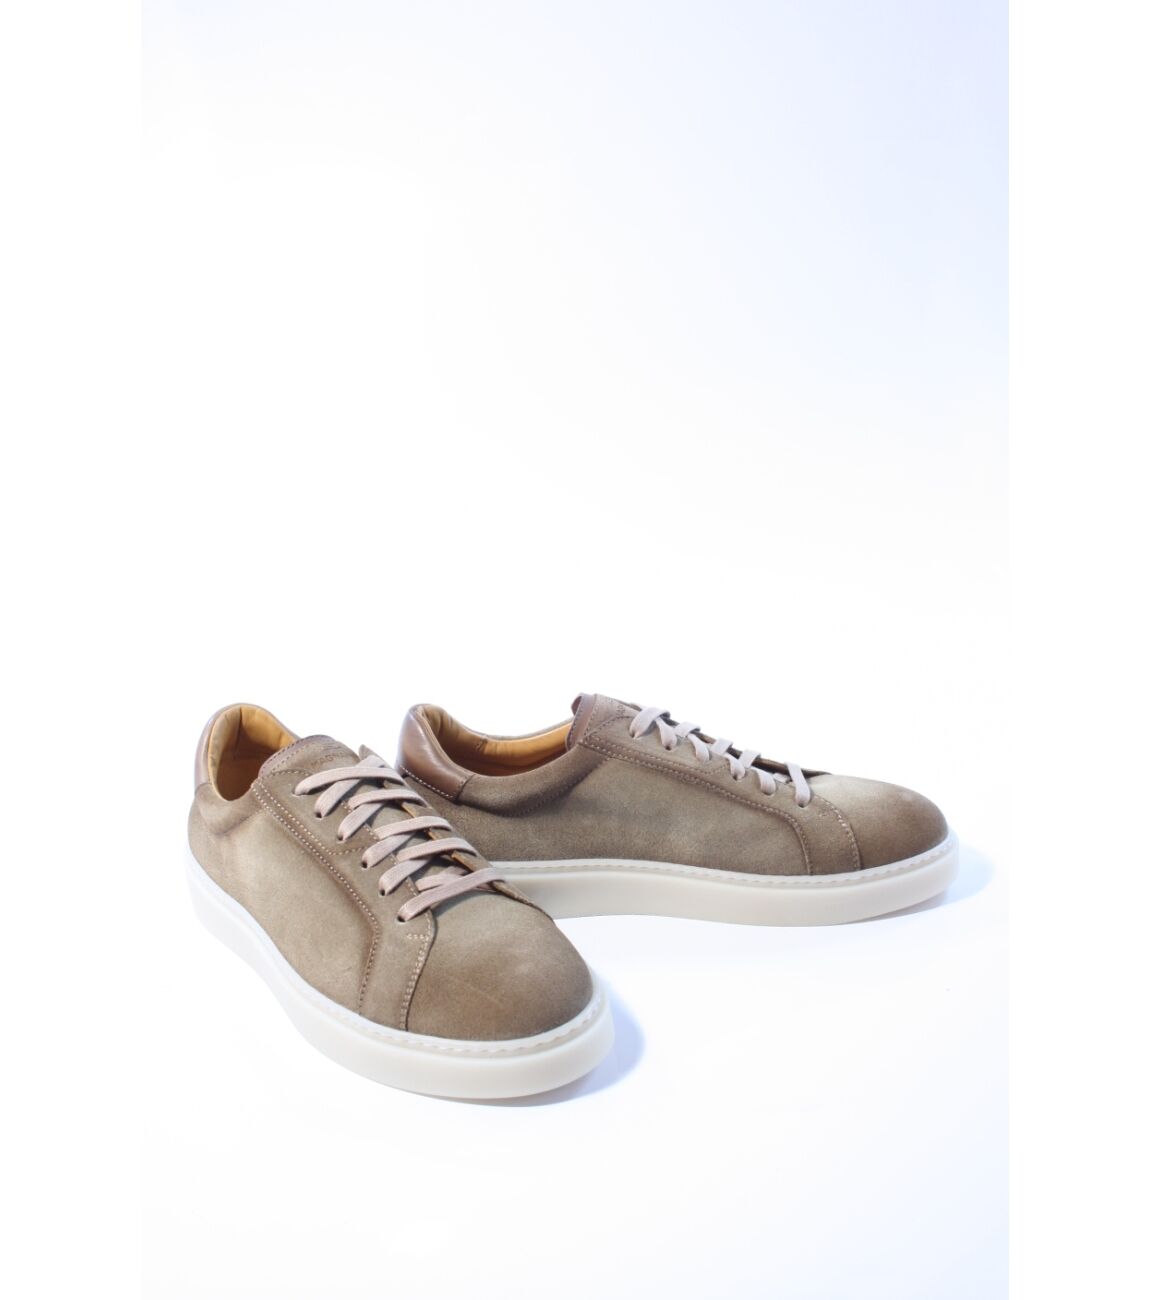 Magnanni Heren sneakers taupe 43